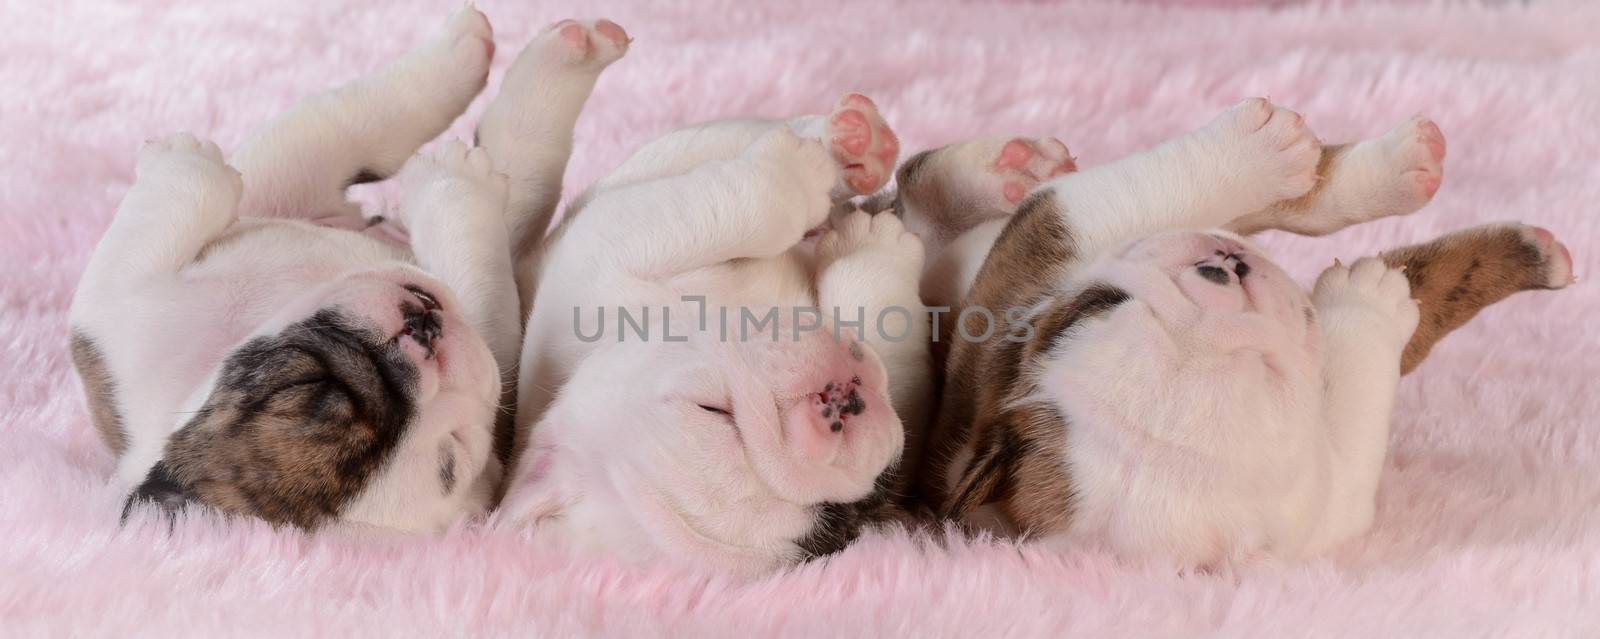 sleeping puppies by willeecole123